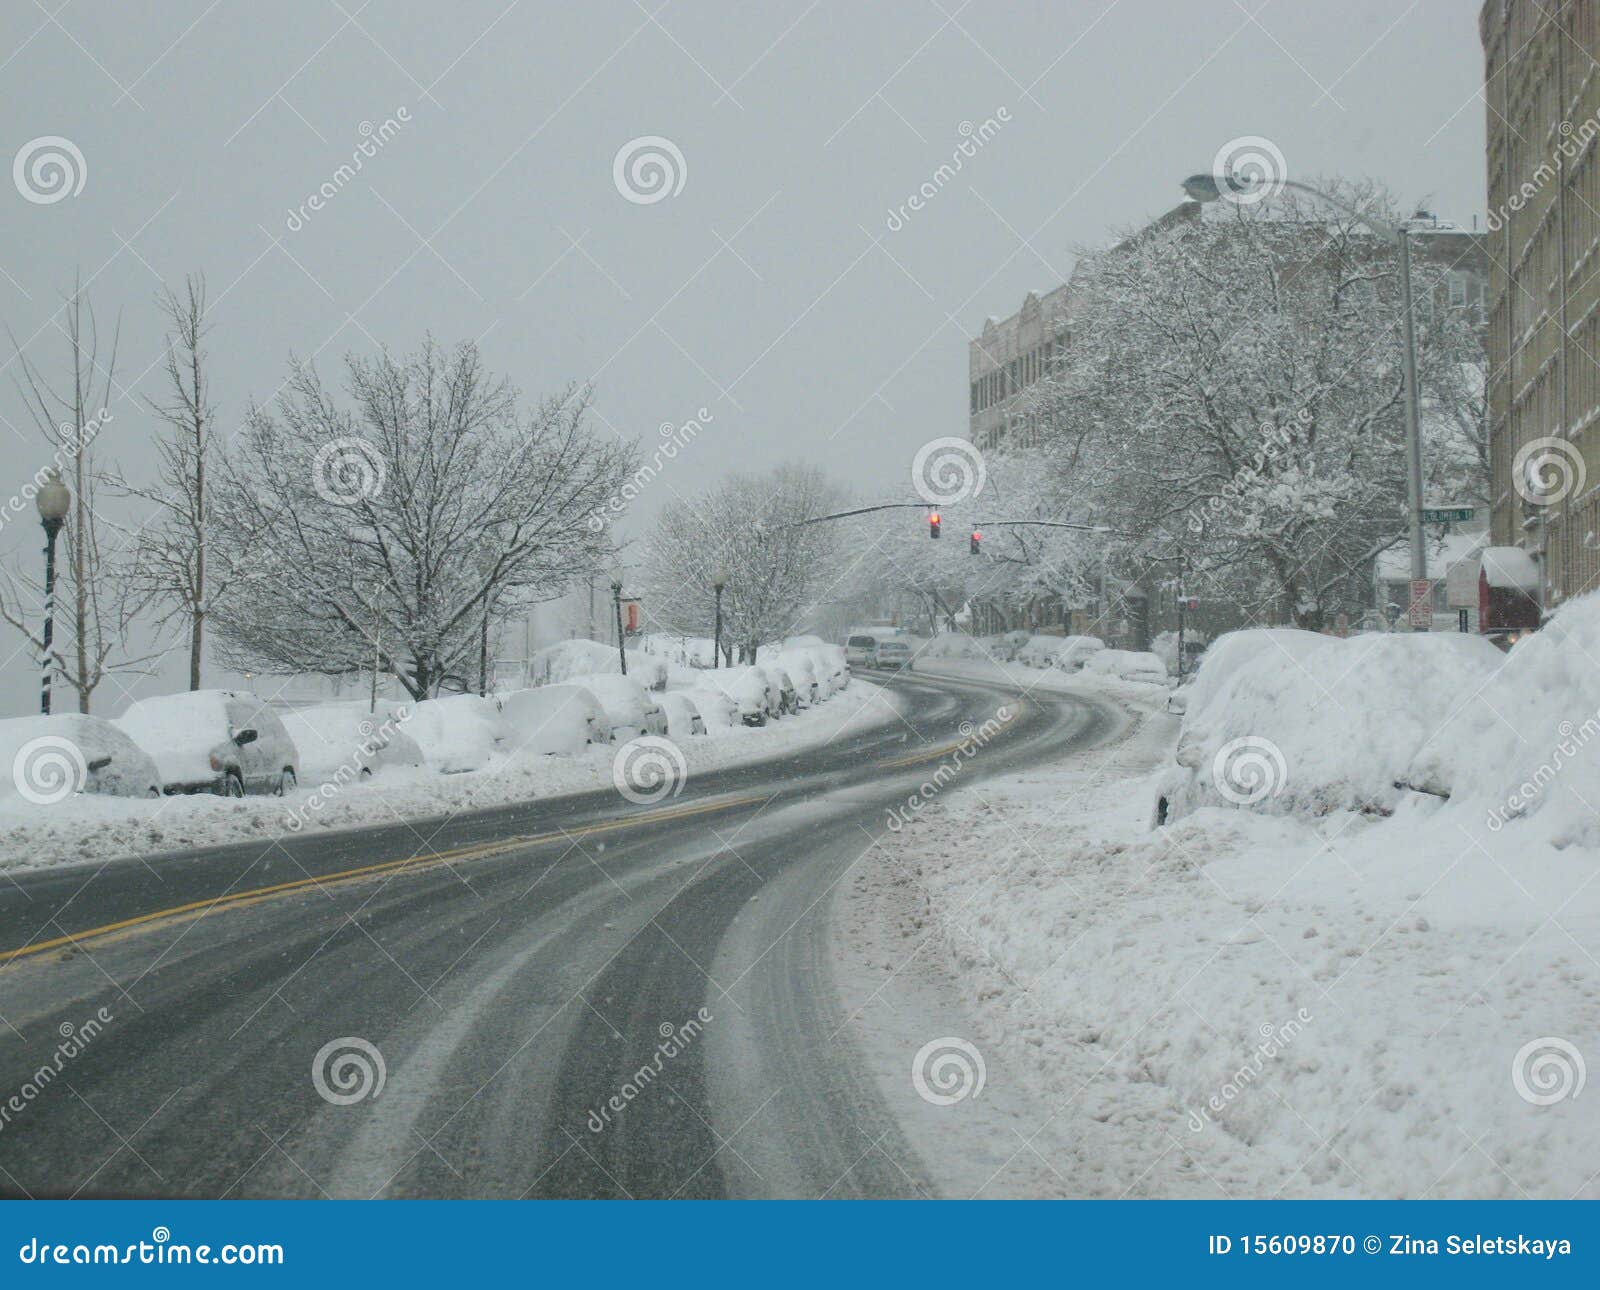 Snow covered road stock photo. Image of snowing, lane - 15609870